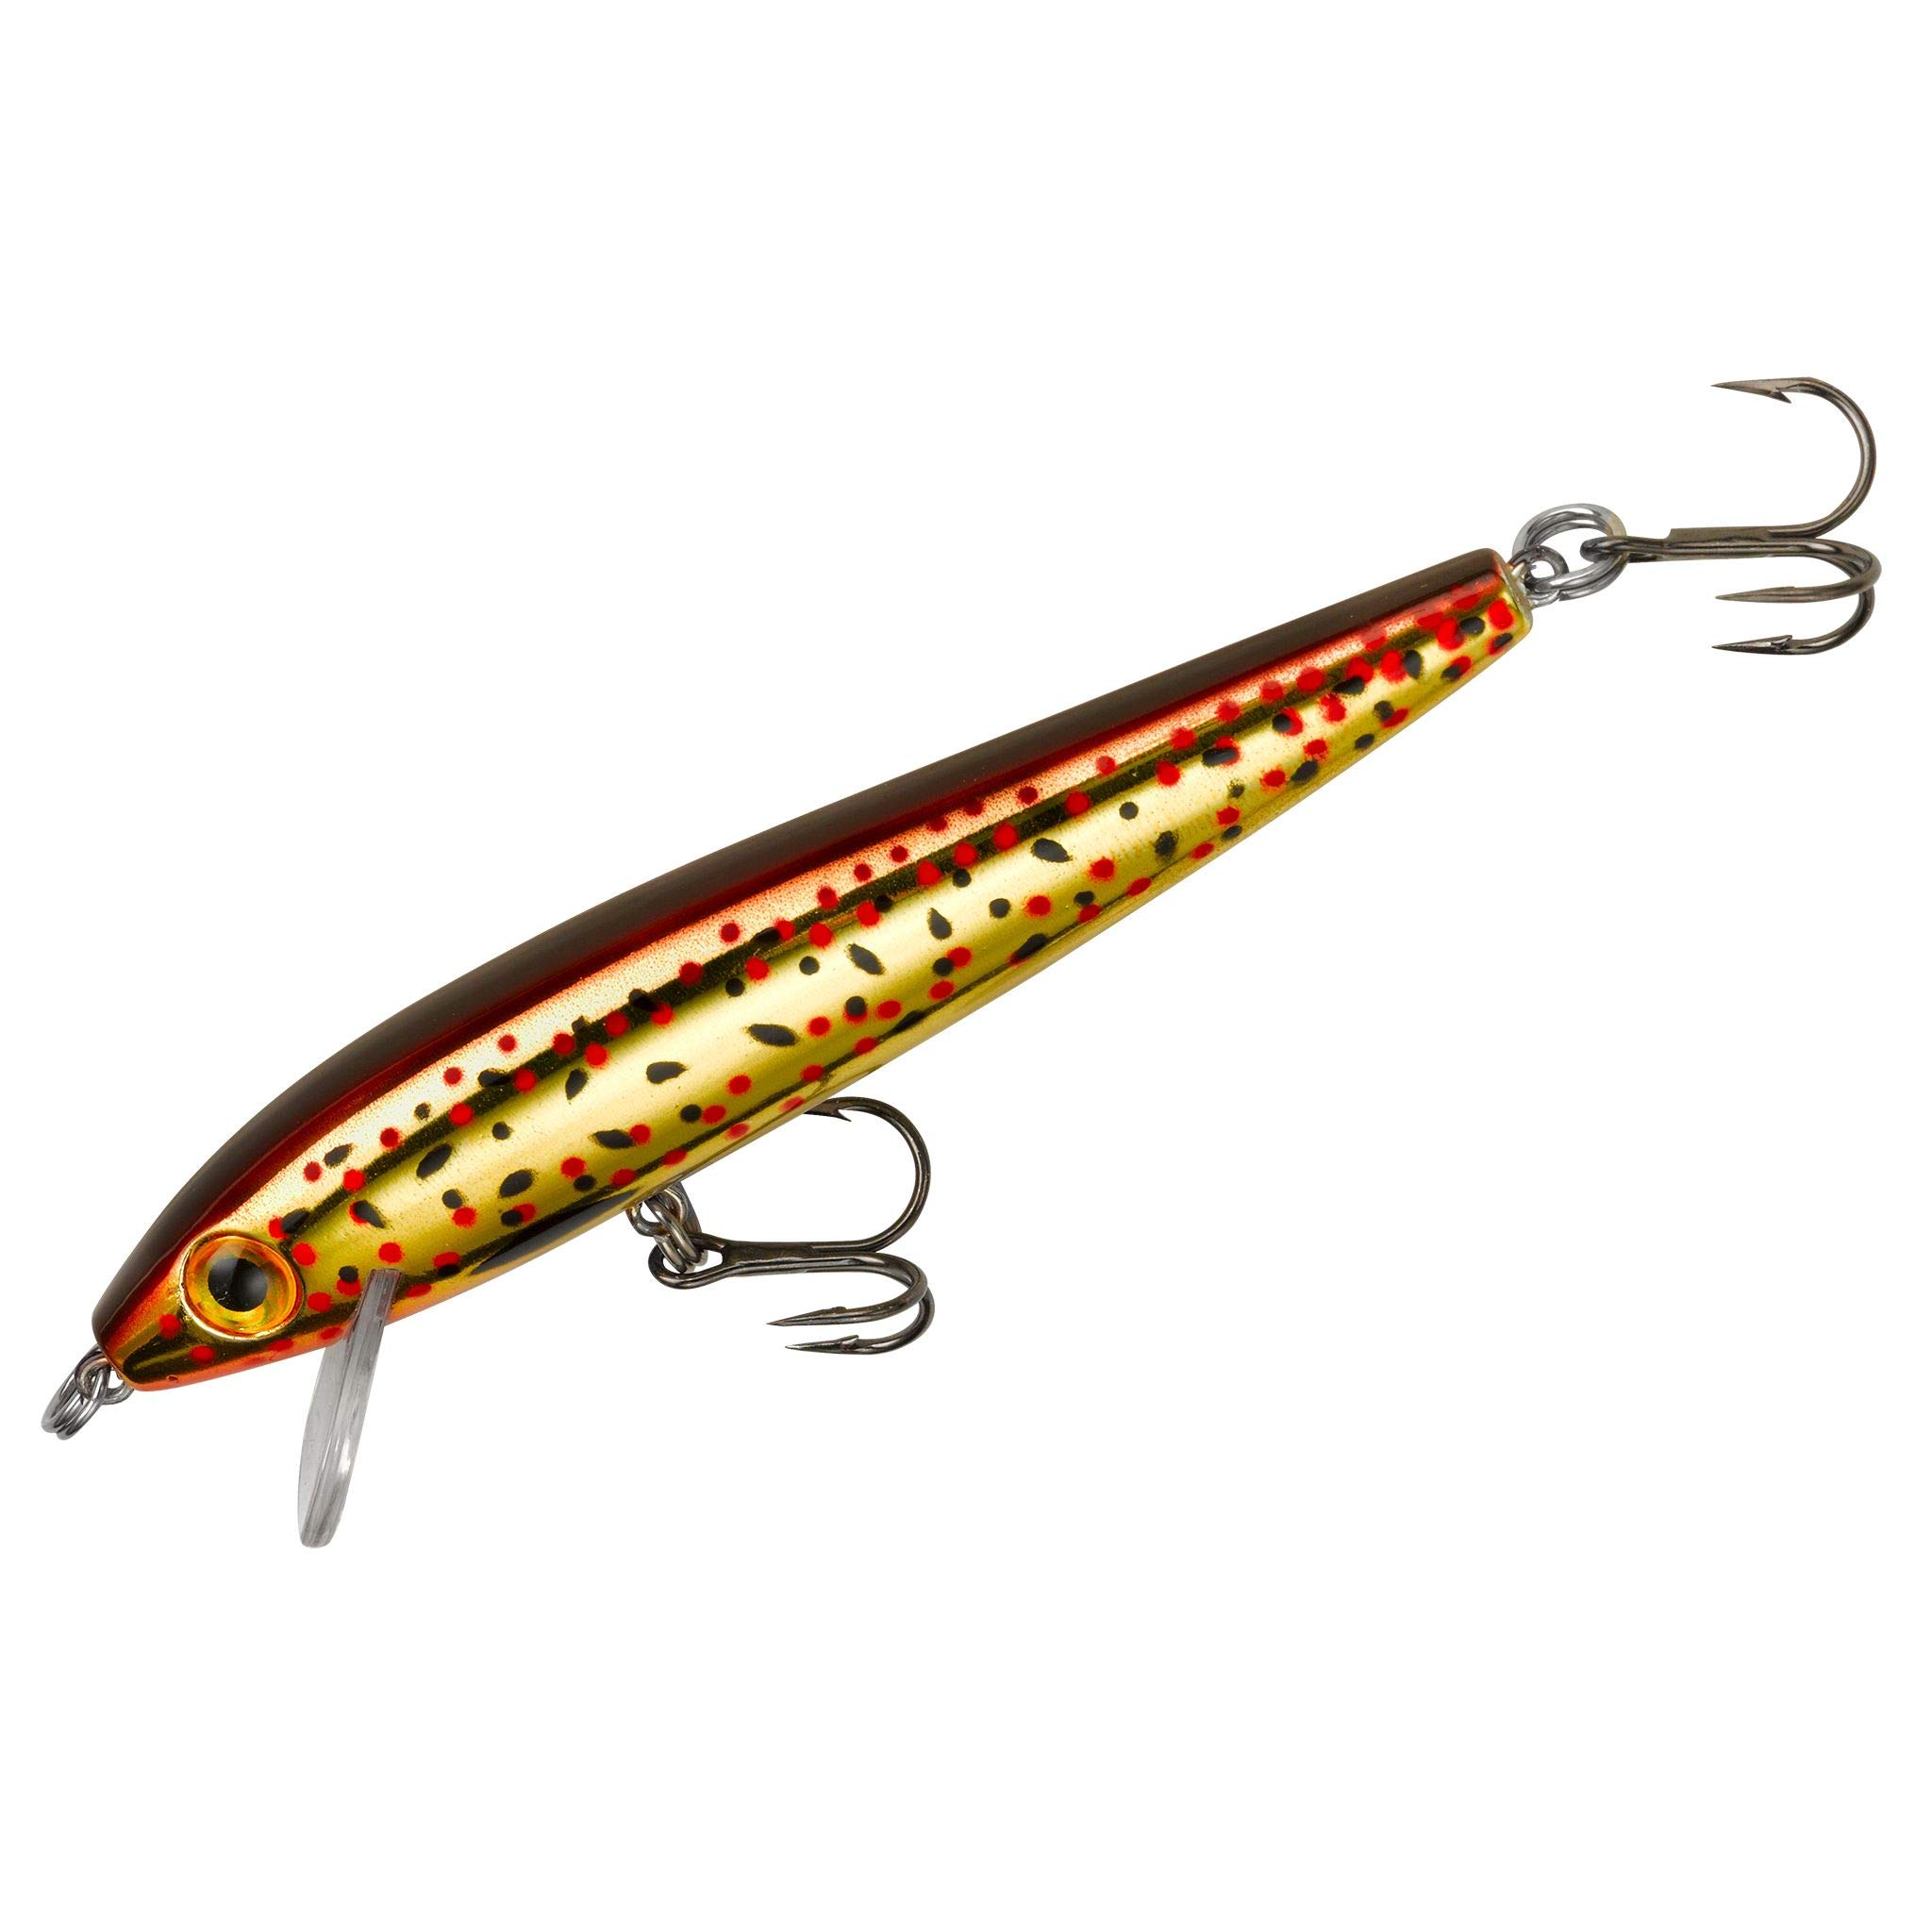 Rebel Lures Tracdown Minnow Slow-Sinking Crankbait Fishing Lure - Great for  Bass, Trout and Walleye Slick Brown Trout 1 5/8 in, 3/32 oz